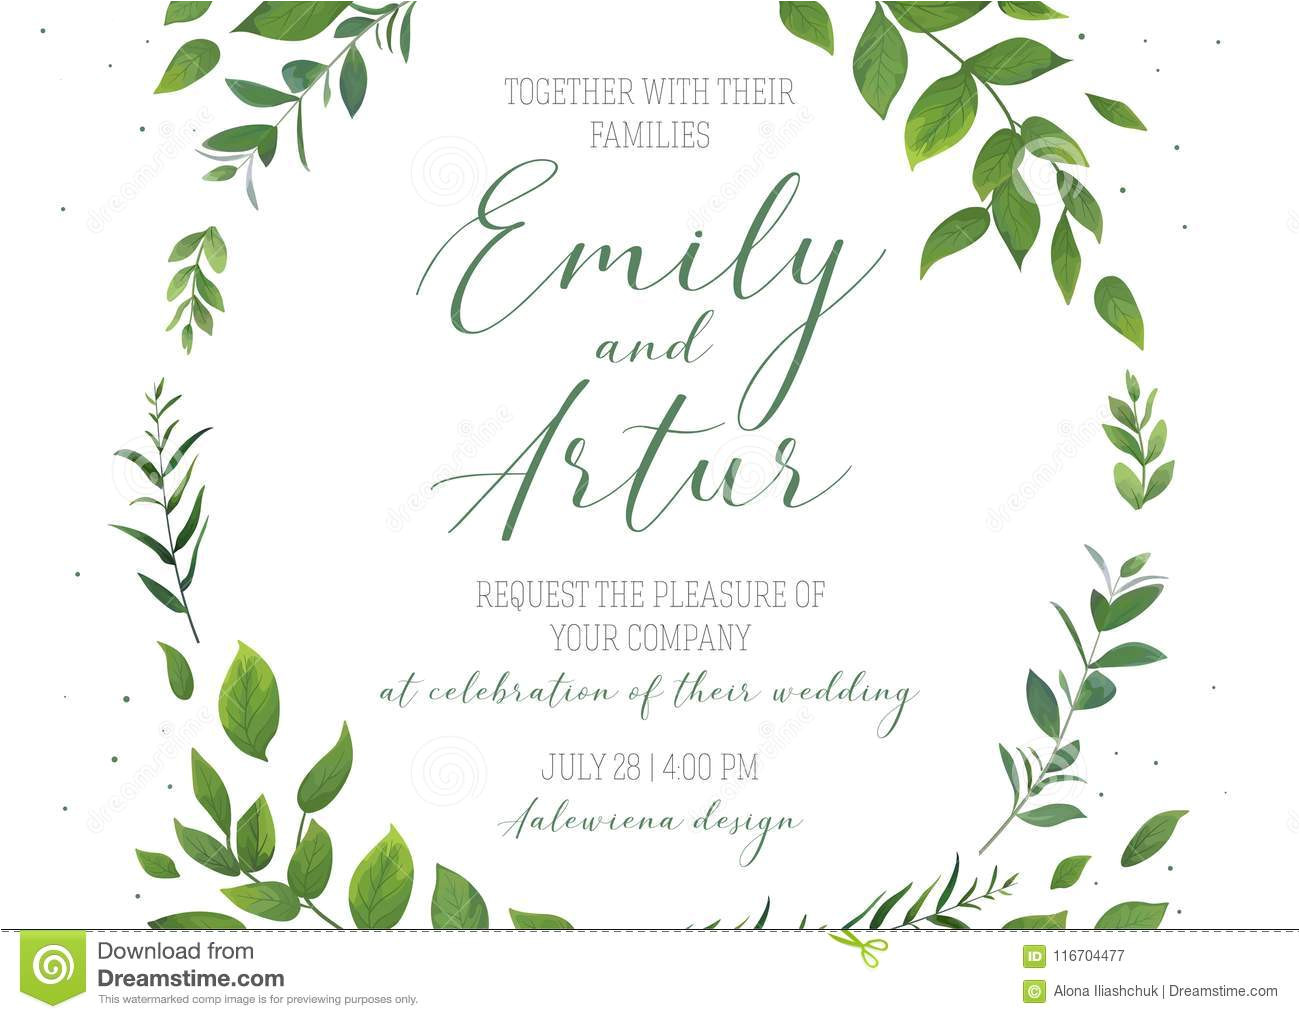 wedding floral invitation invite save date card vector template modern rustic eco style design watercolor botanical green 116704477 jpg